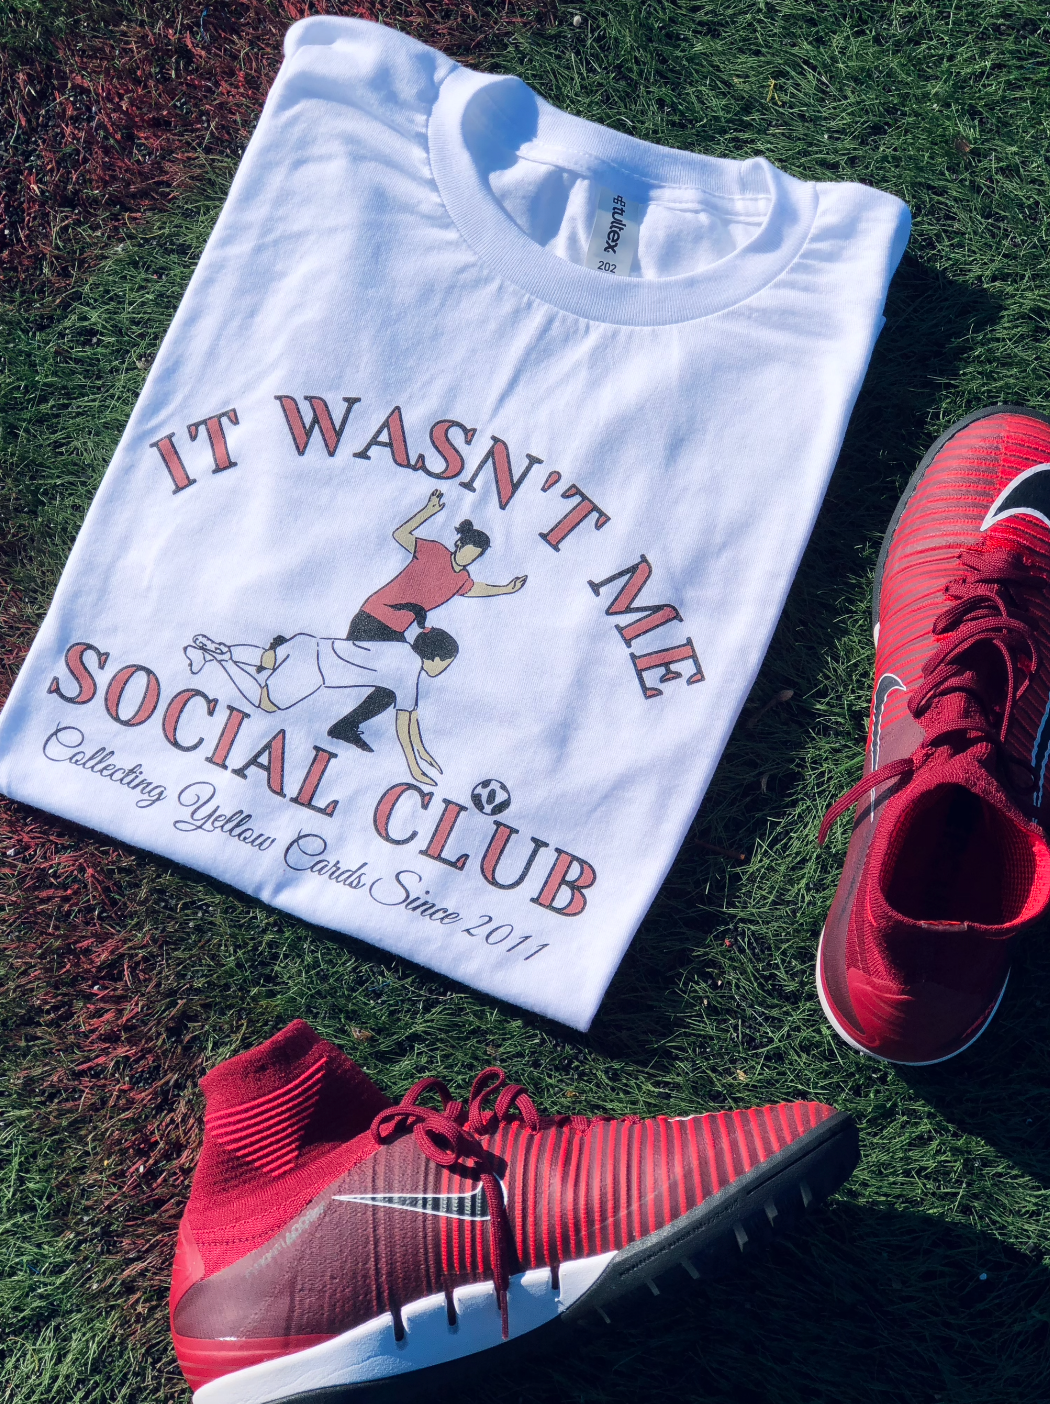 it wasn't be social club collecting yellow cards tshirt by soccergrlprobs